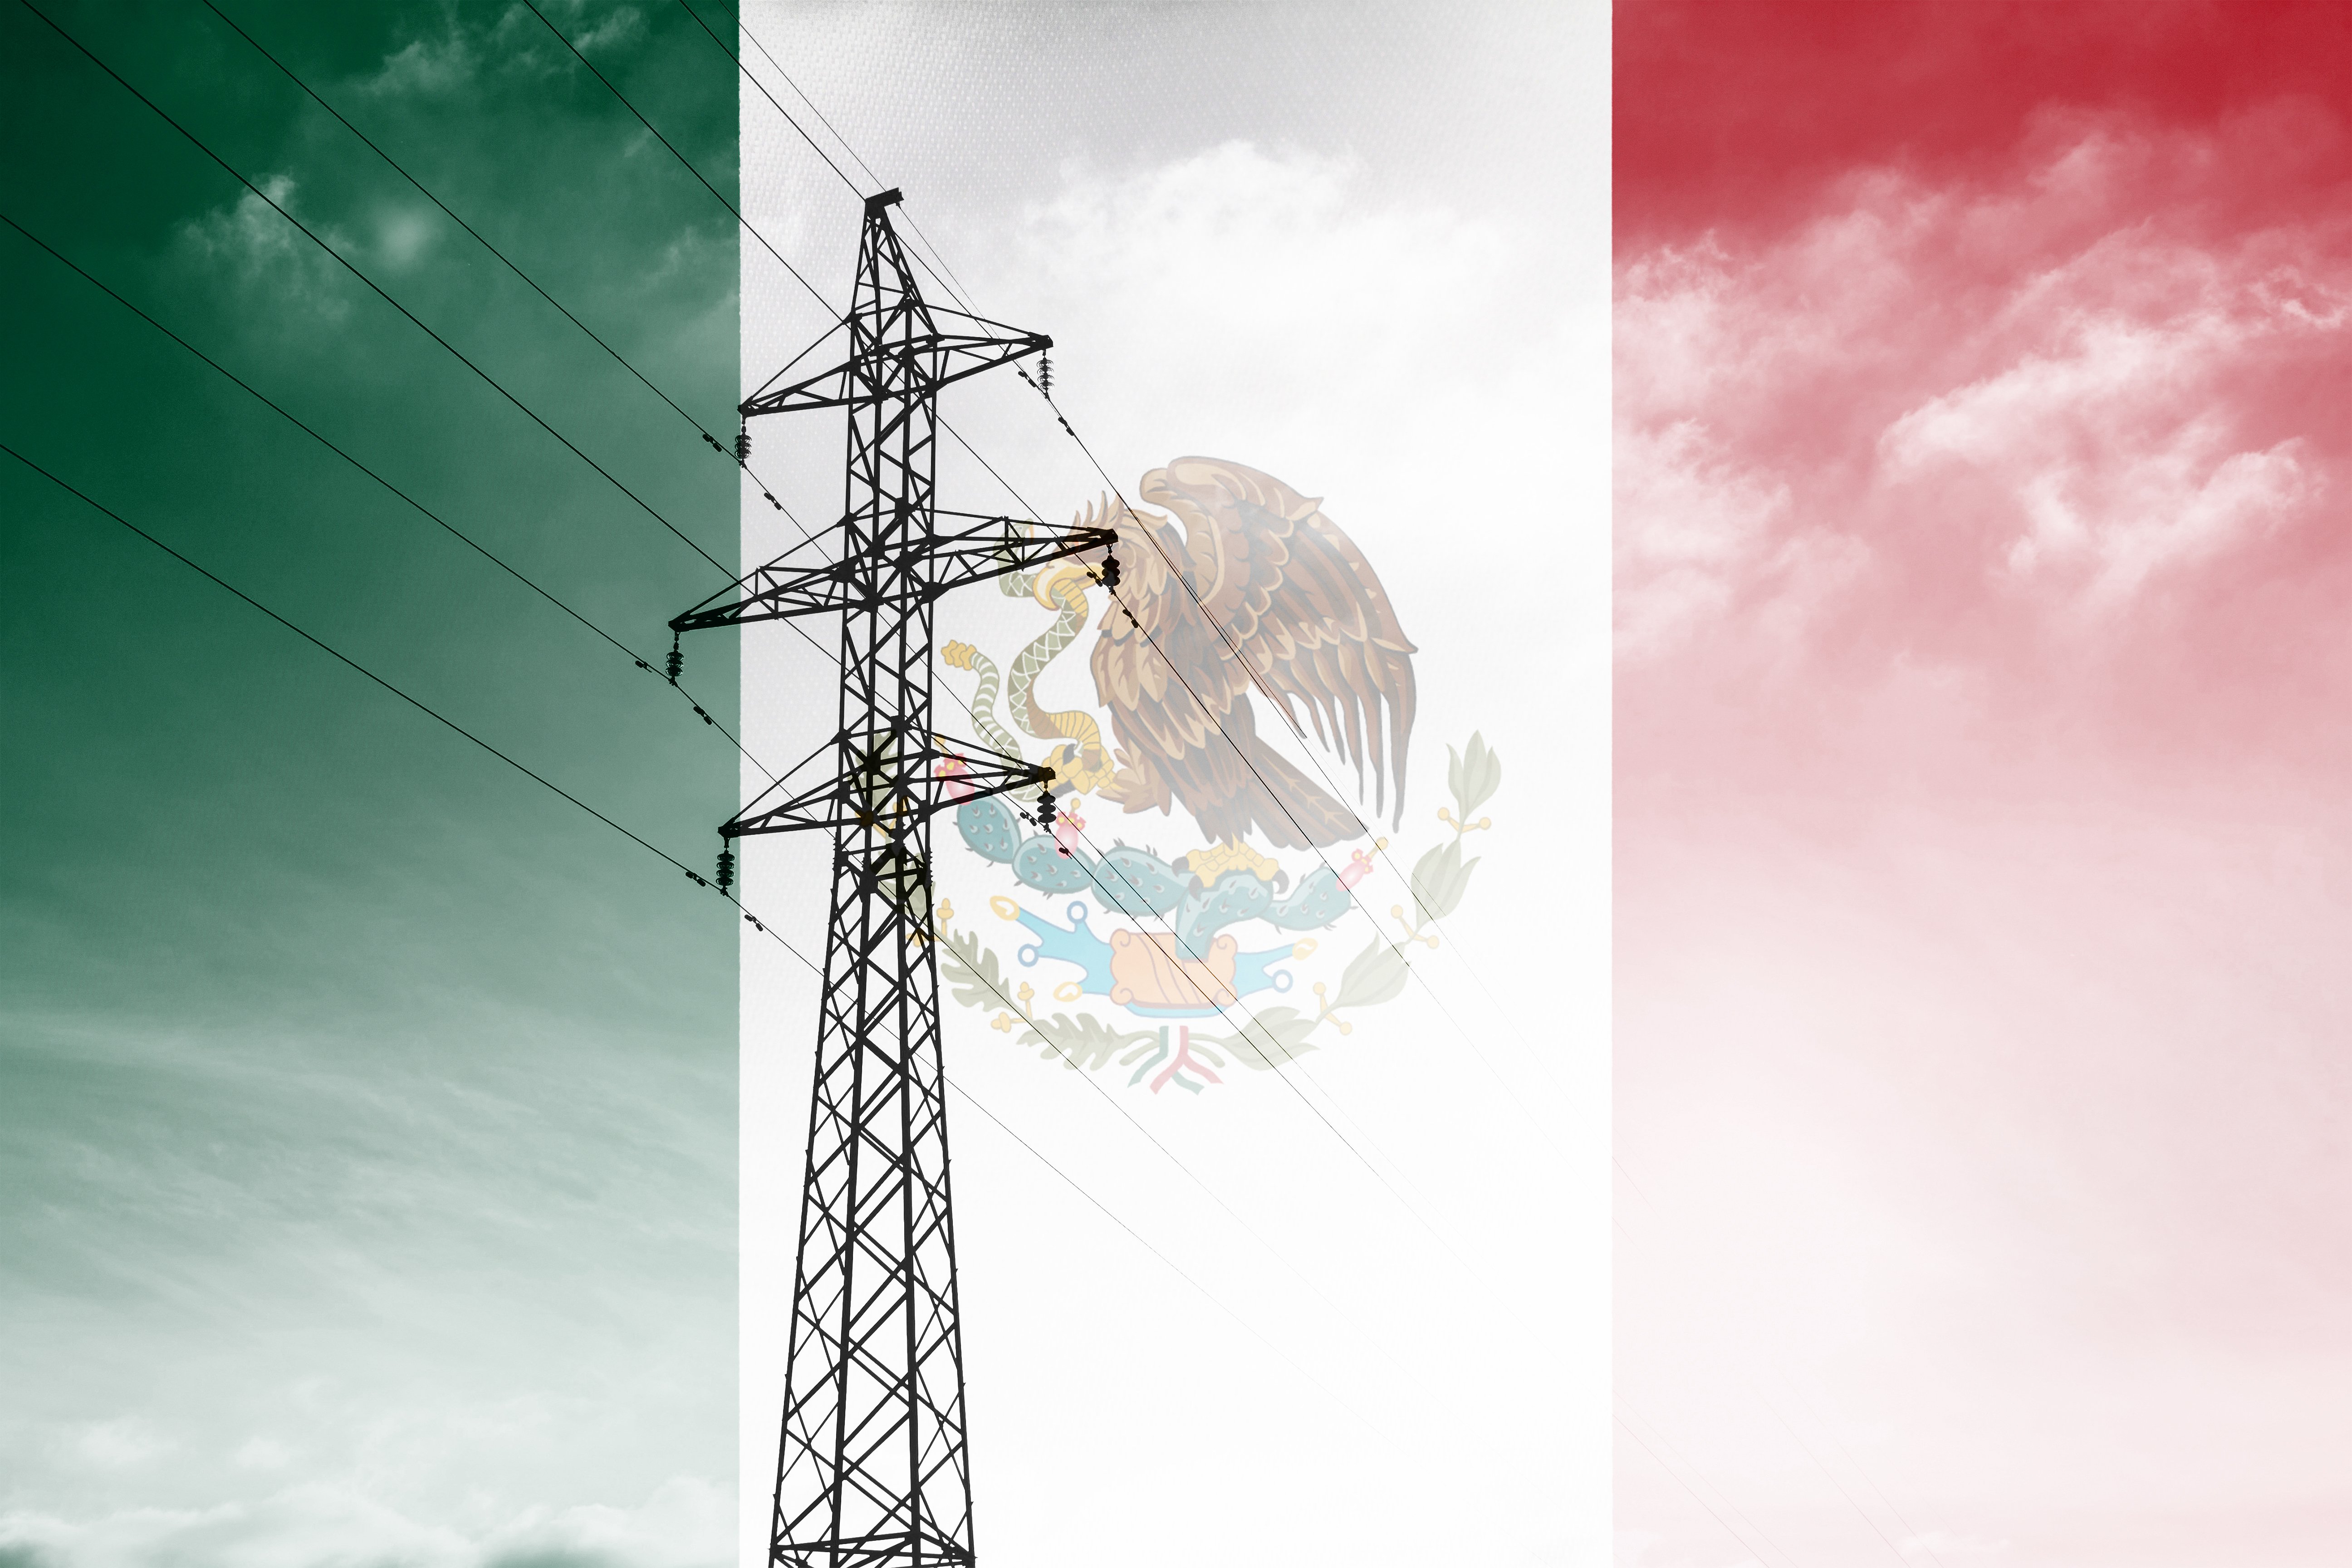 Electricity Lines in Mexico